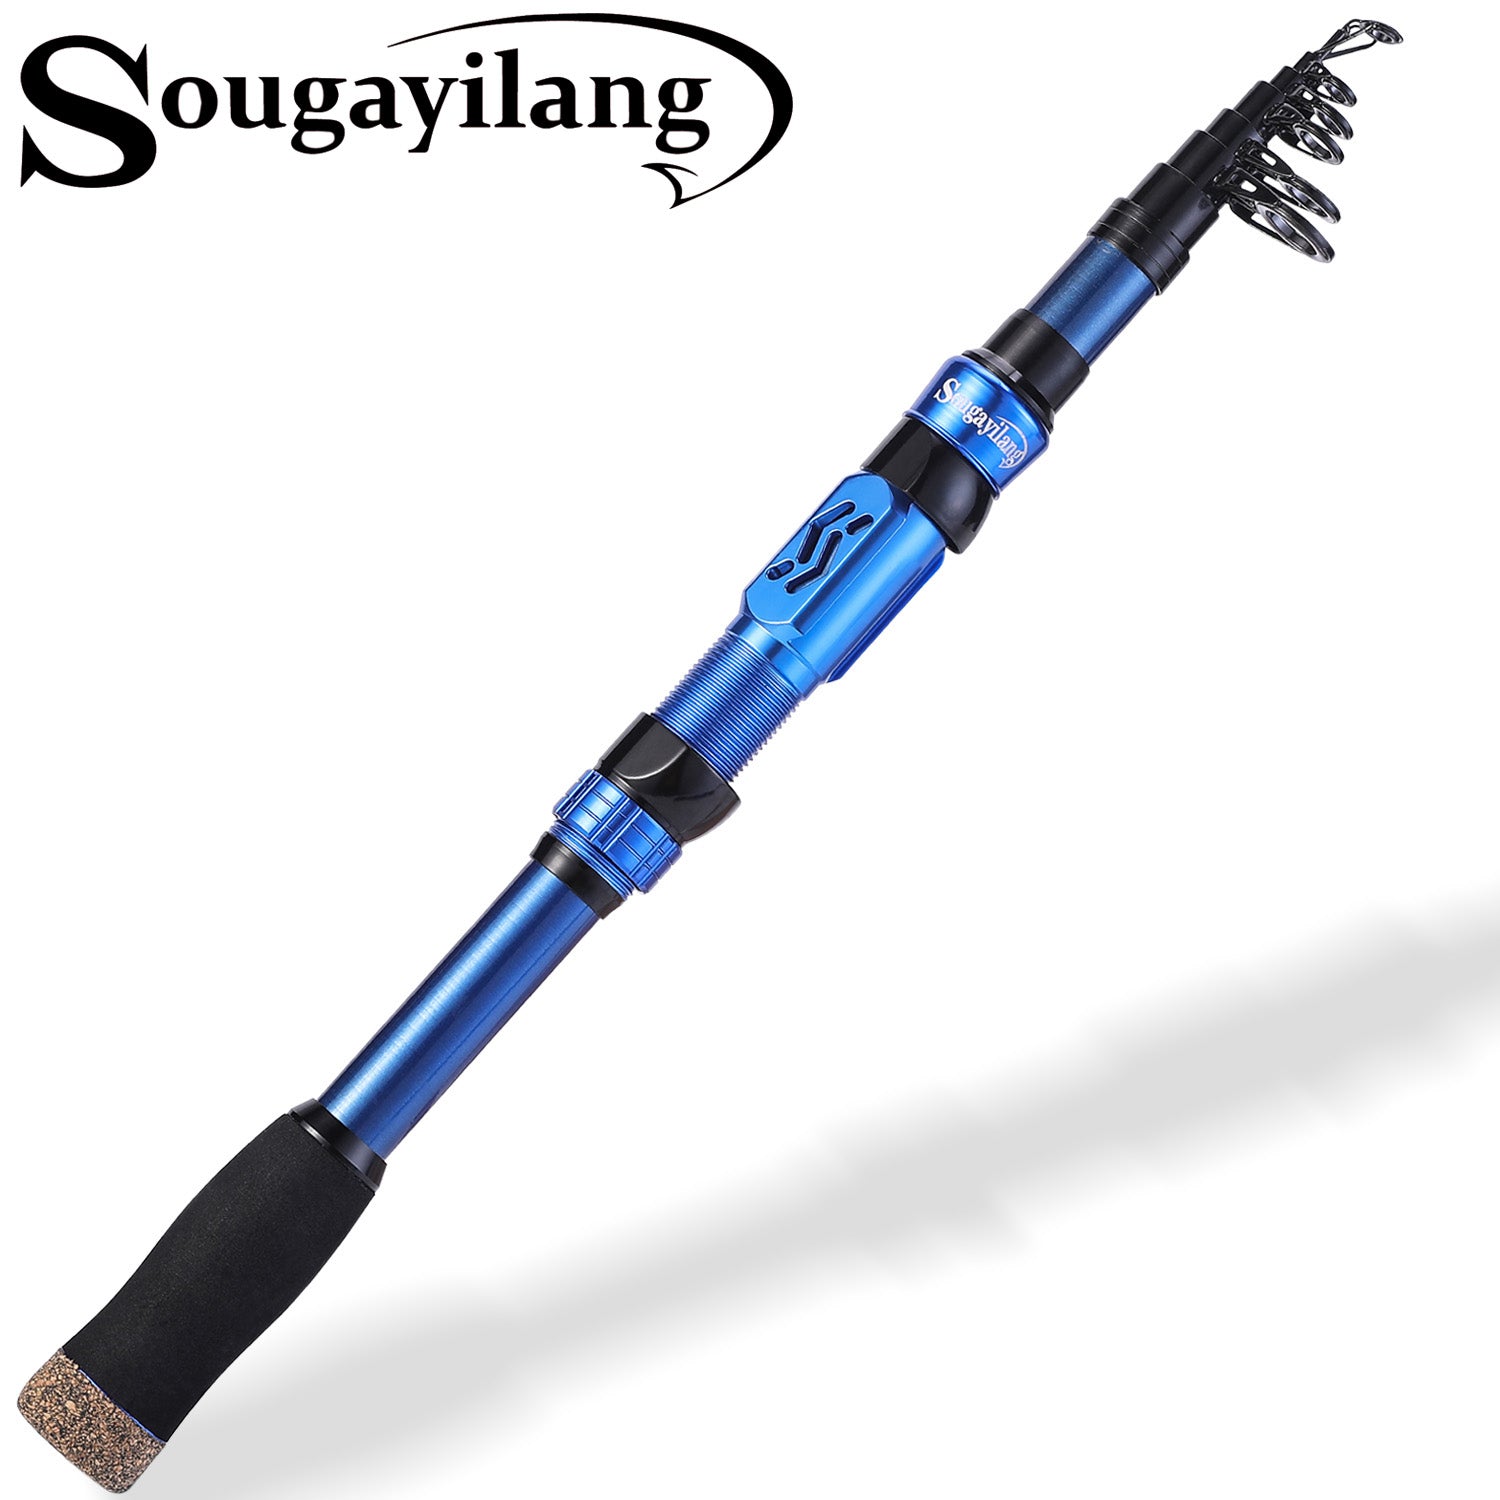 Travel Fishing Rods, Telescopic Fishing Rods, Ceramic Rings, Travel Fishing  Rod for Freshwater And Saltwater Trout Fishing - 2.7m